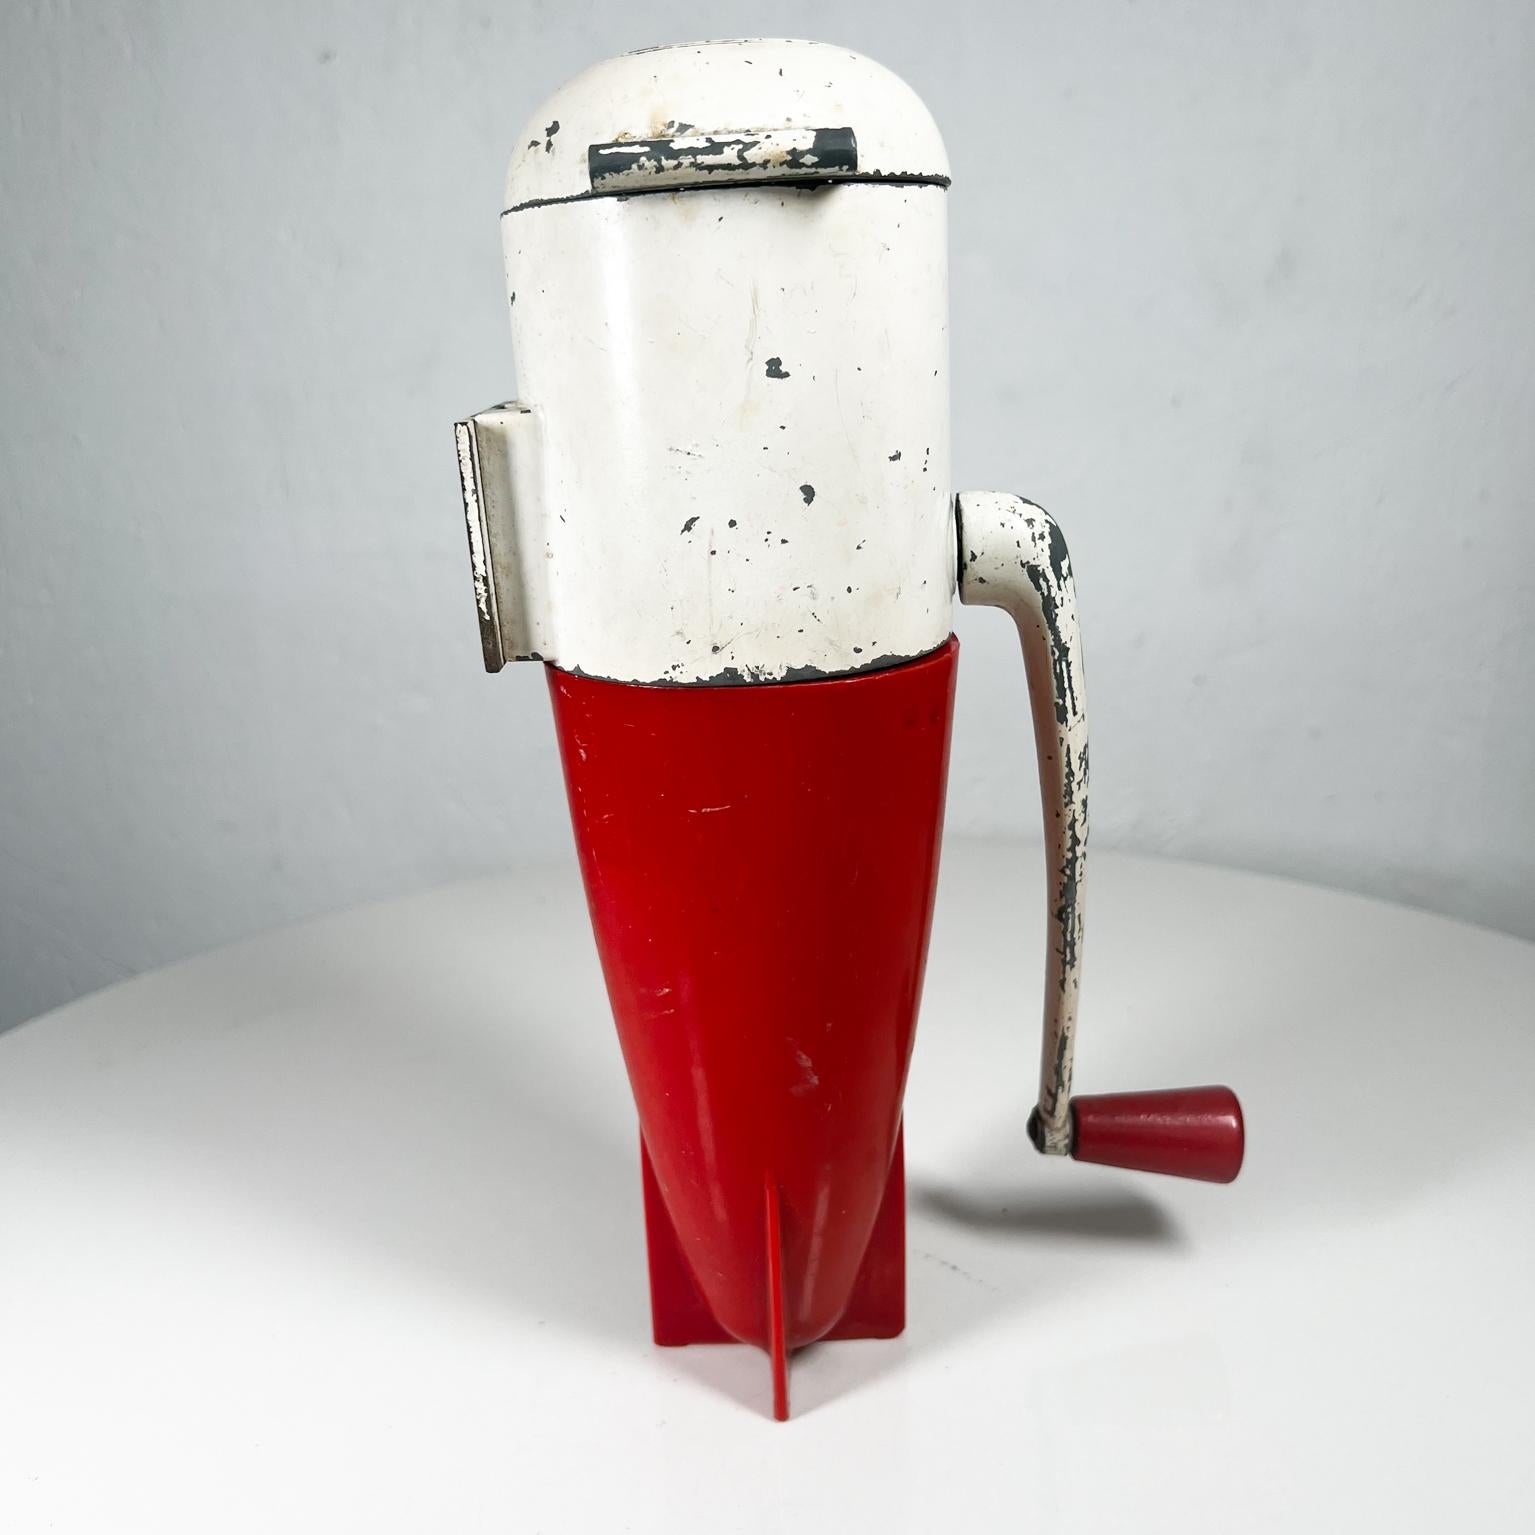 1950s dasey corp triple rocket ice crusher red and white metal
Measures: 6.25 d x 3.75 w x 10.38 tall
Dazey Corp St Louis, Miss
Wall mount bracket
Unrestored original vintage condition. Blemishes and fading.
Untested
See all Images.

